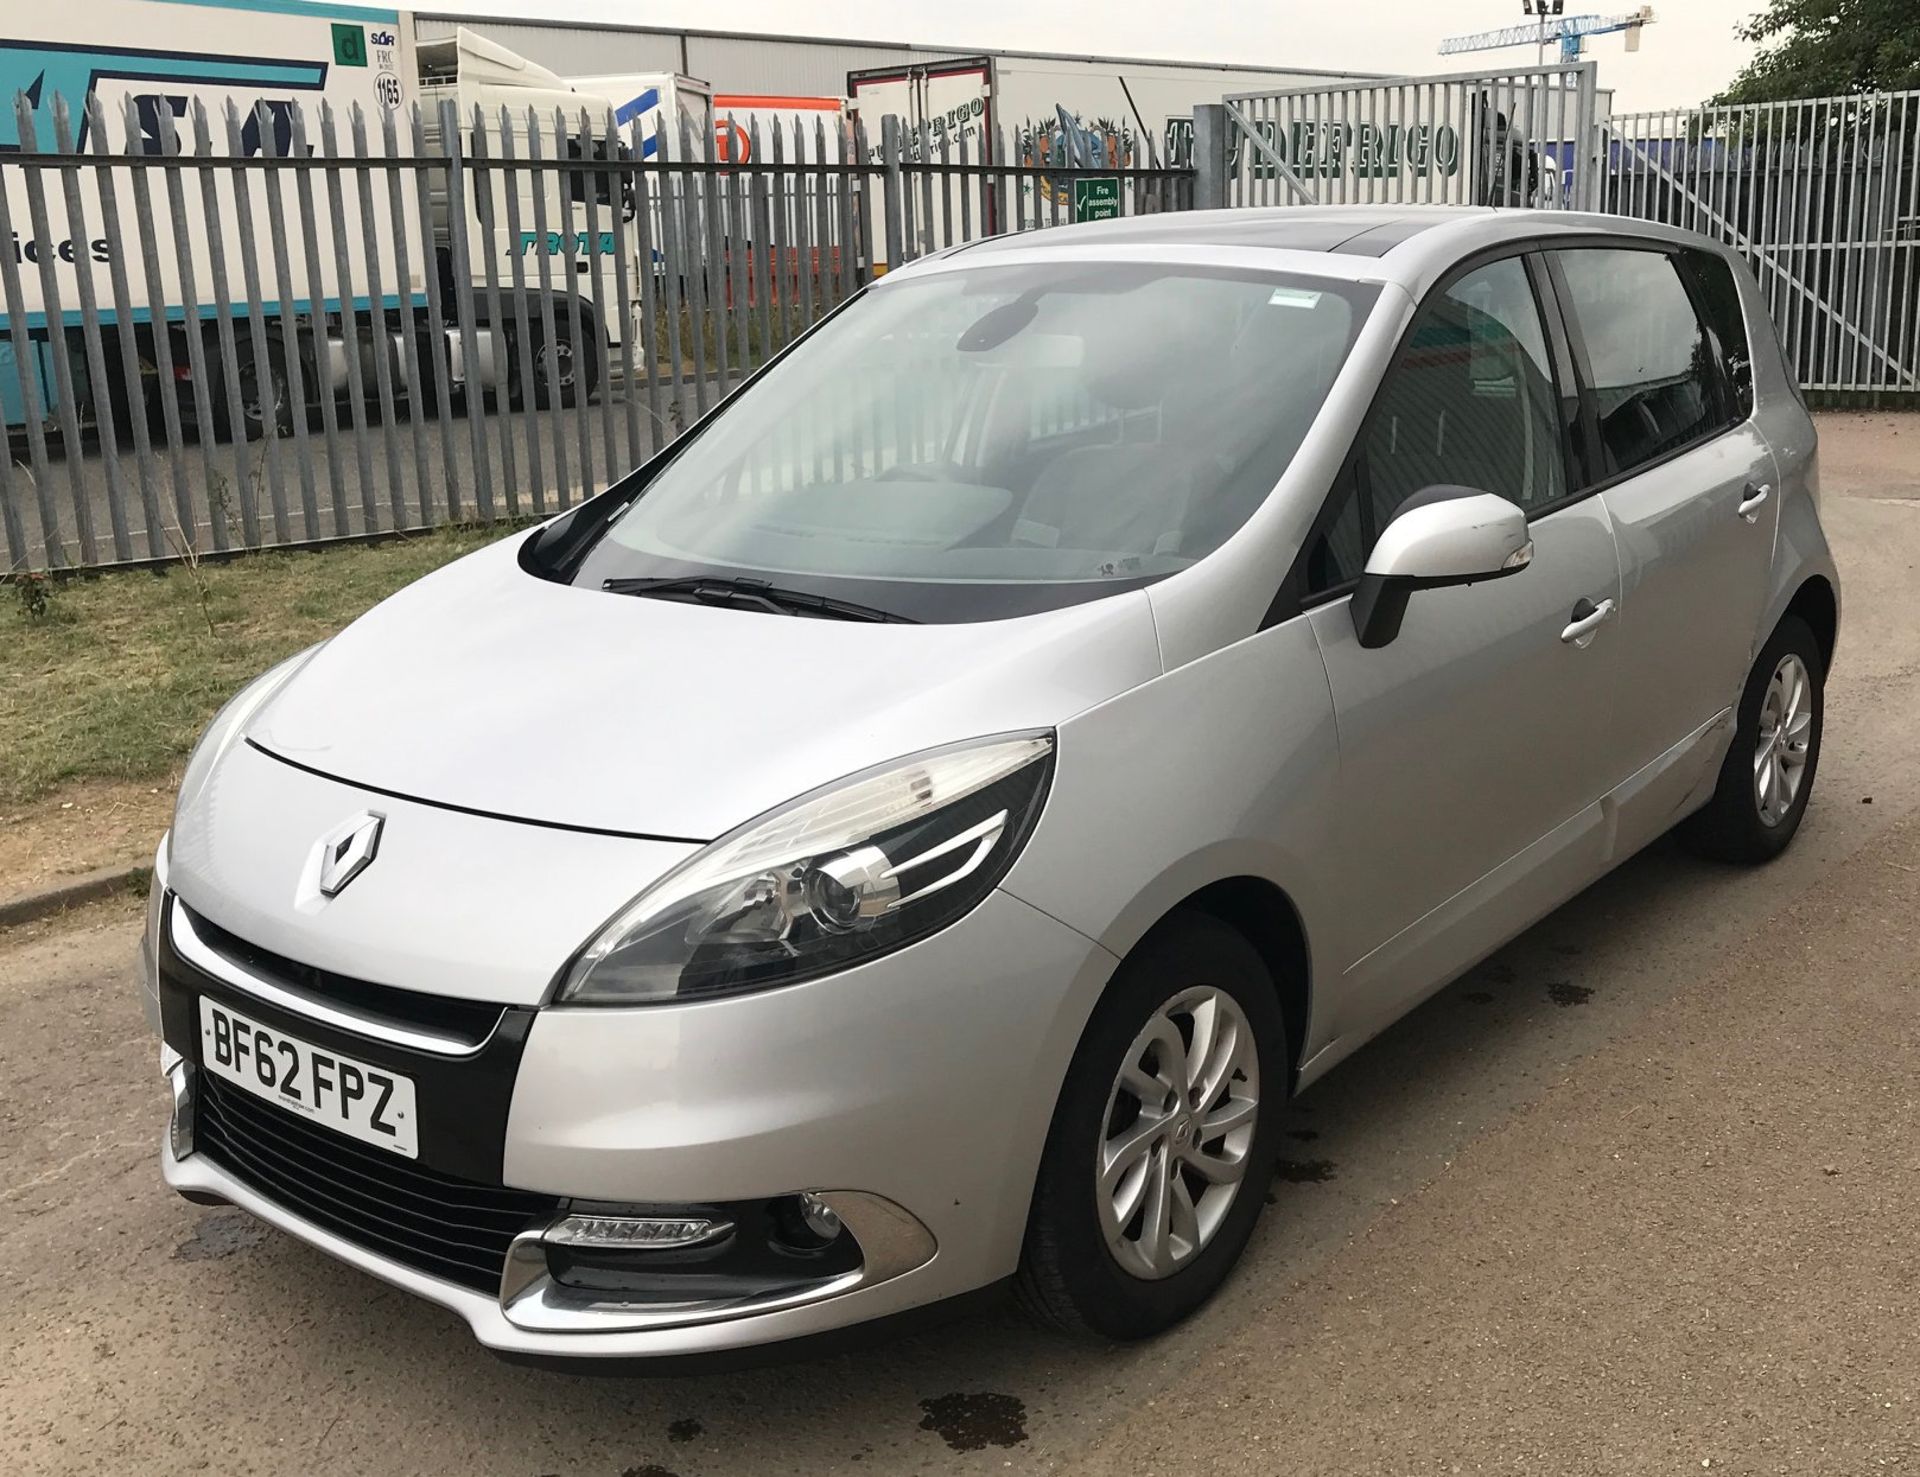 2012 Renault Scenic 1.5 Dci D-Que Tt Energy 5 Dr MPV - CL505 - NO VAT ON THE HAMMER - Location: Corb - Image 6 of 15